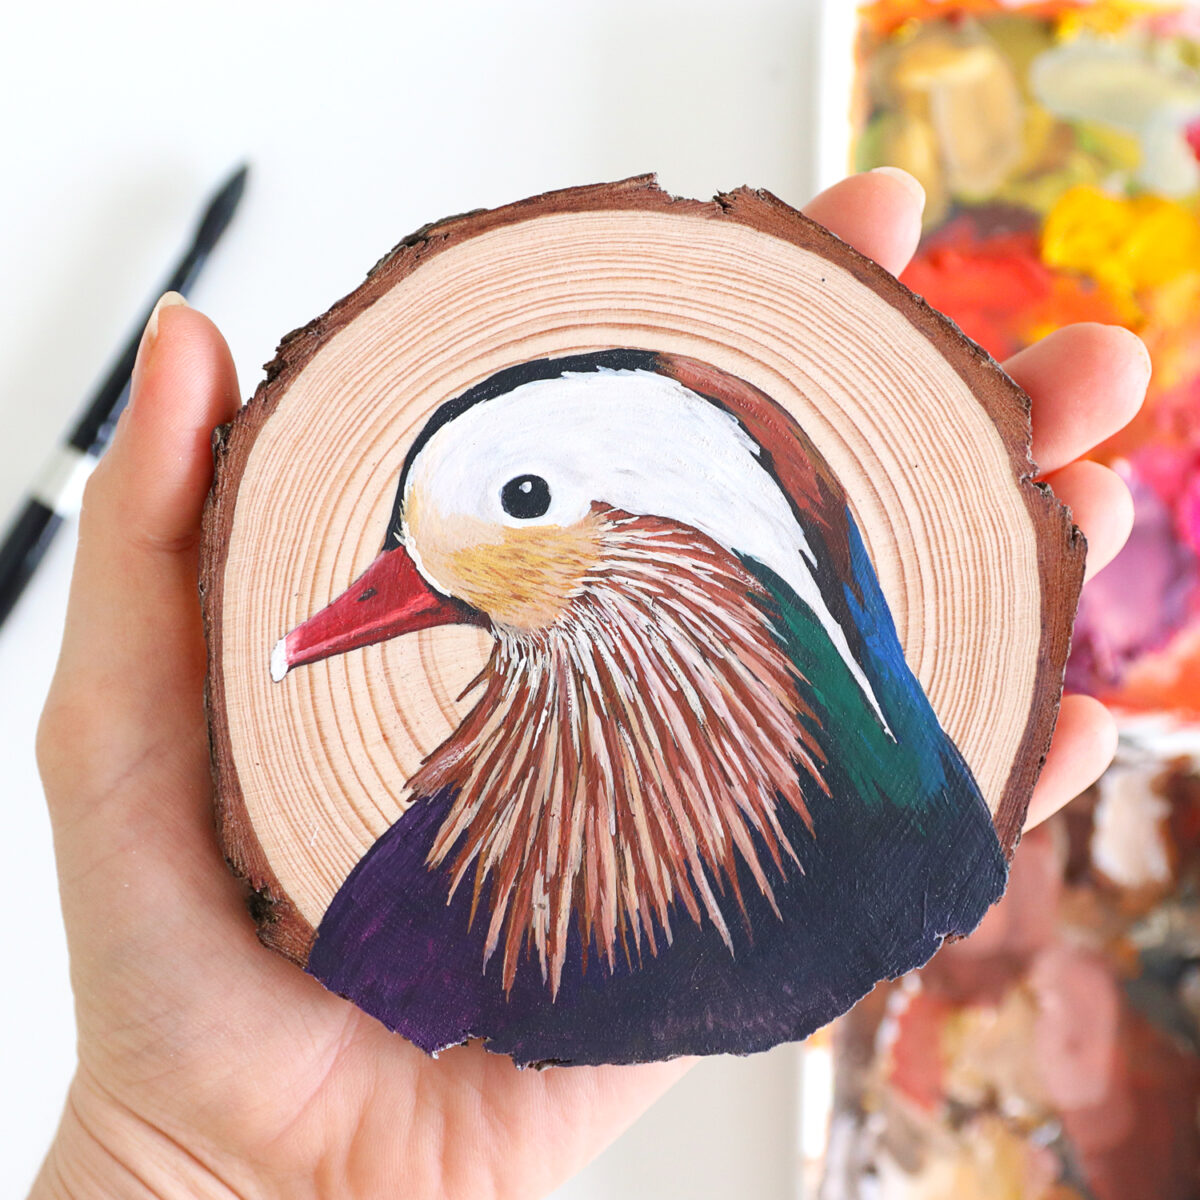 100 Days Of Birds A Marvelous Series Of Gouache On Wood Paintings By Deanna Maree (25)